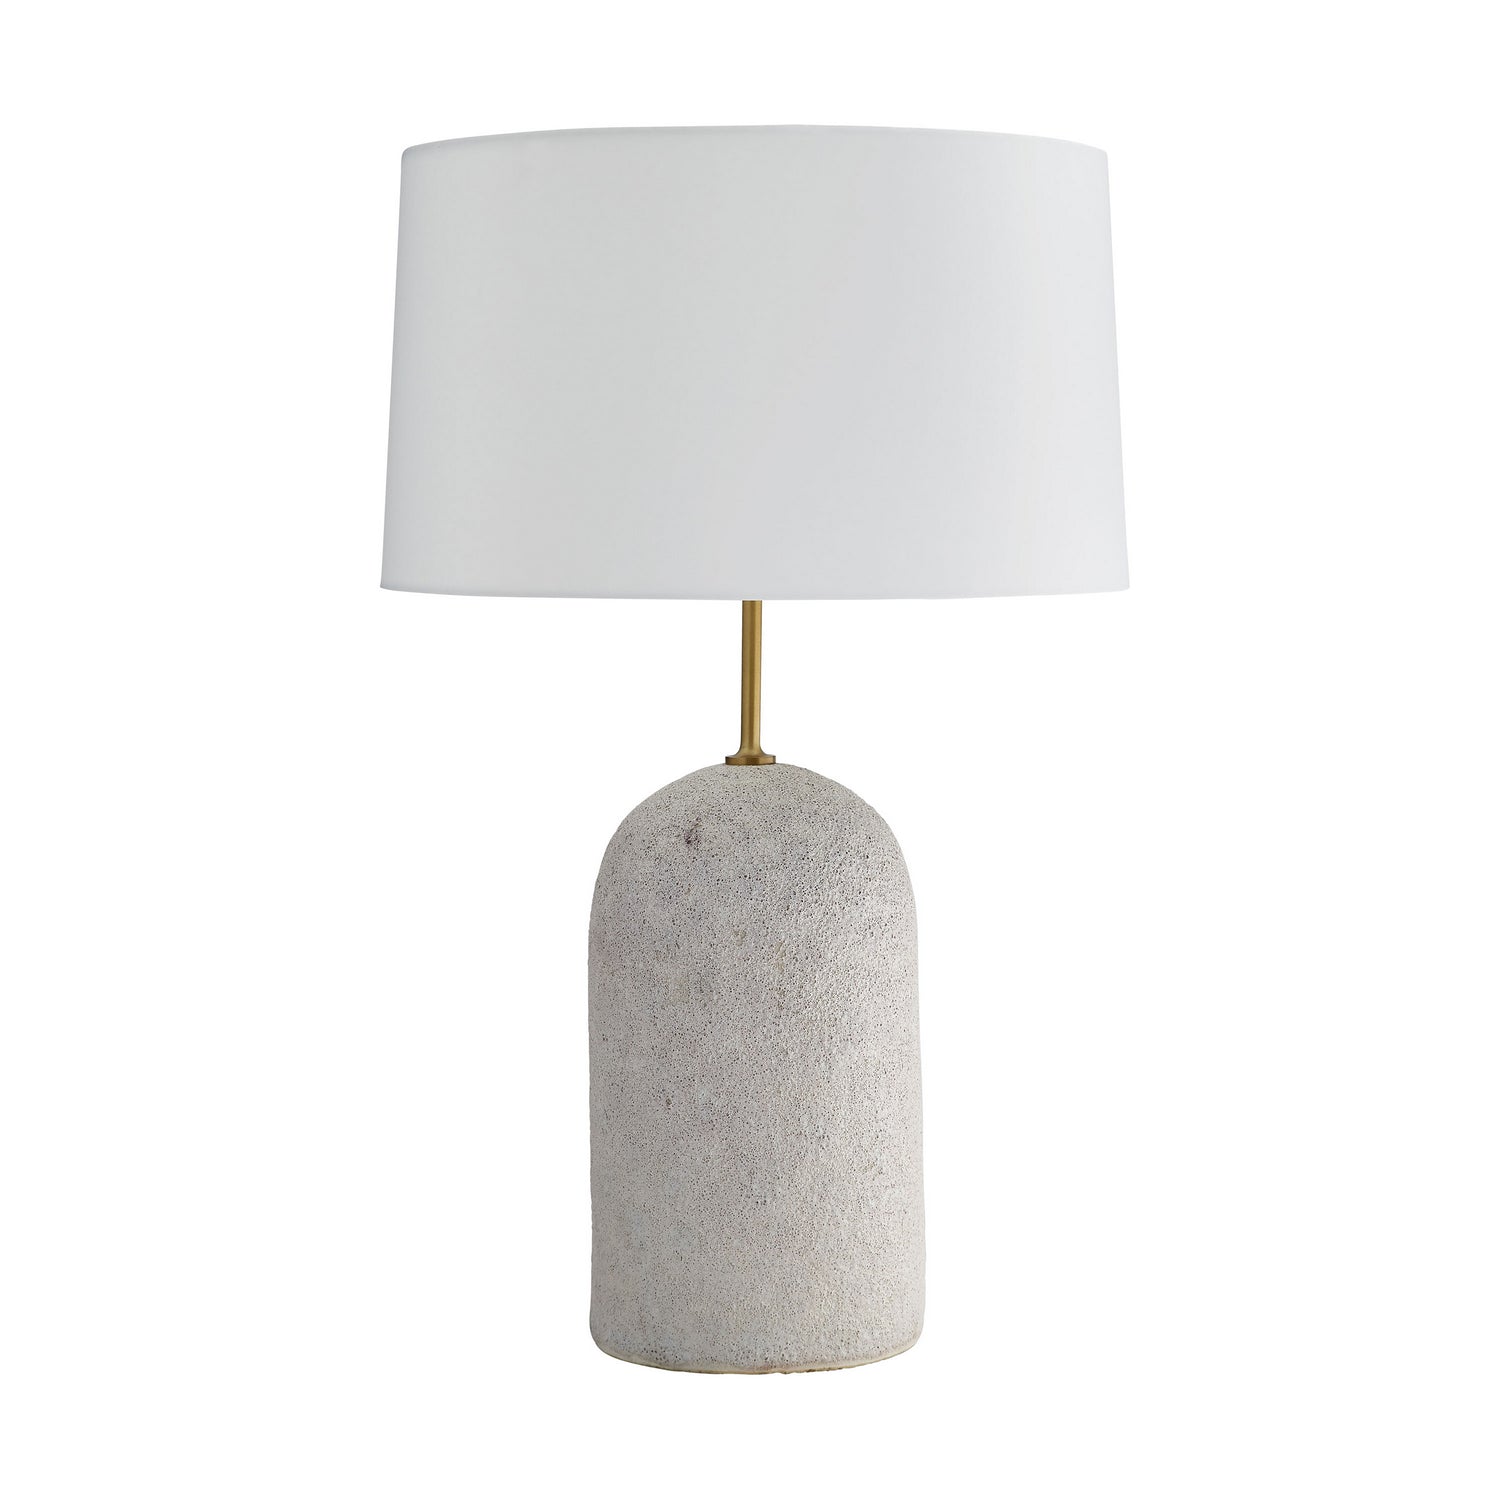 One Light Table Lamp from the Capelli collection in Ivory Volcanic Glaze finish